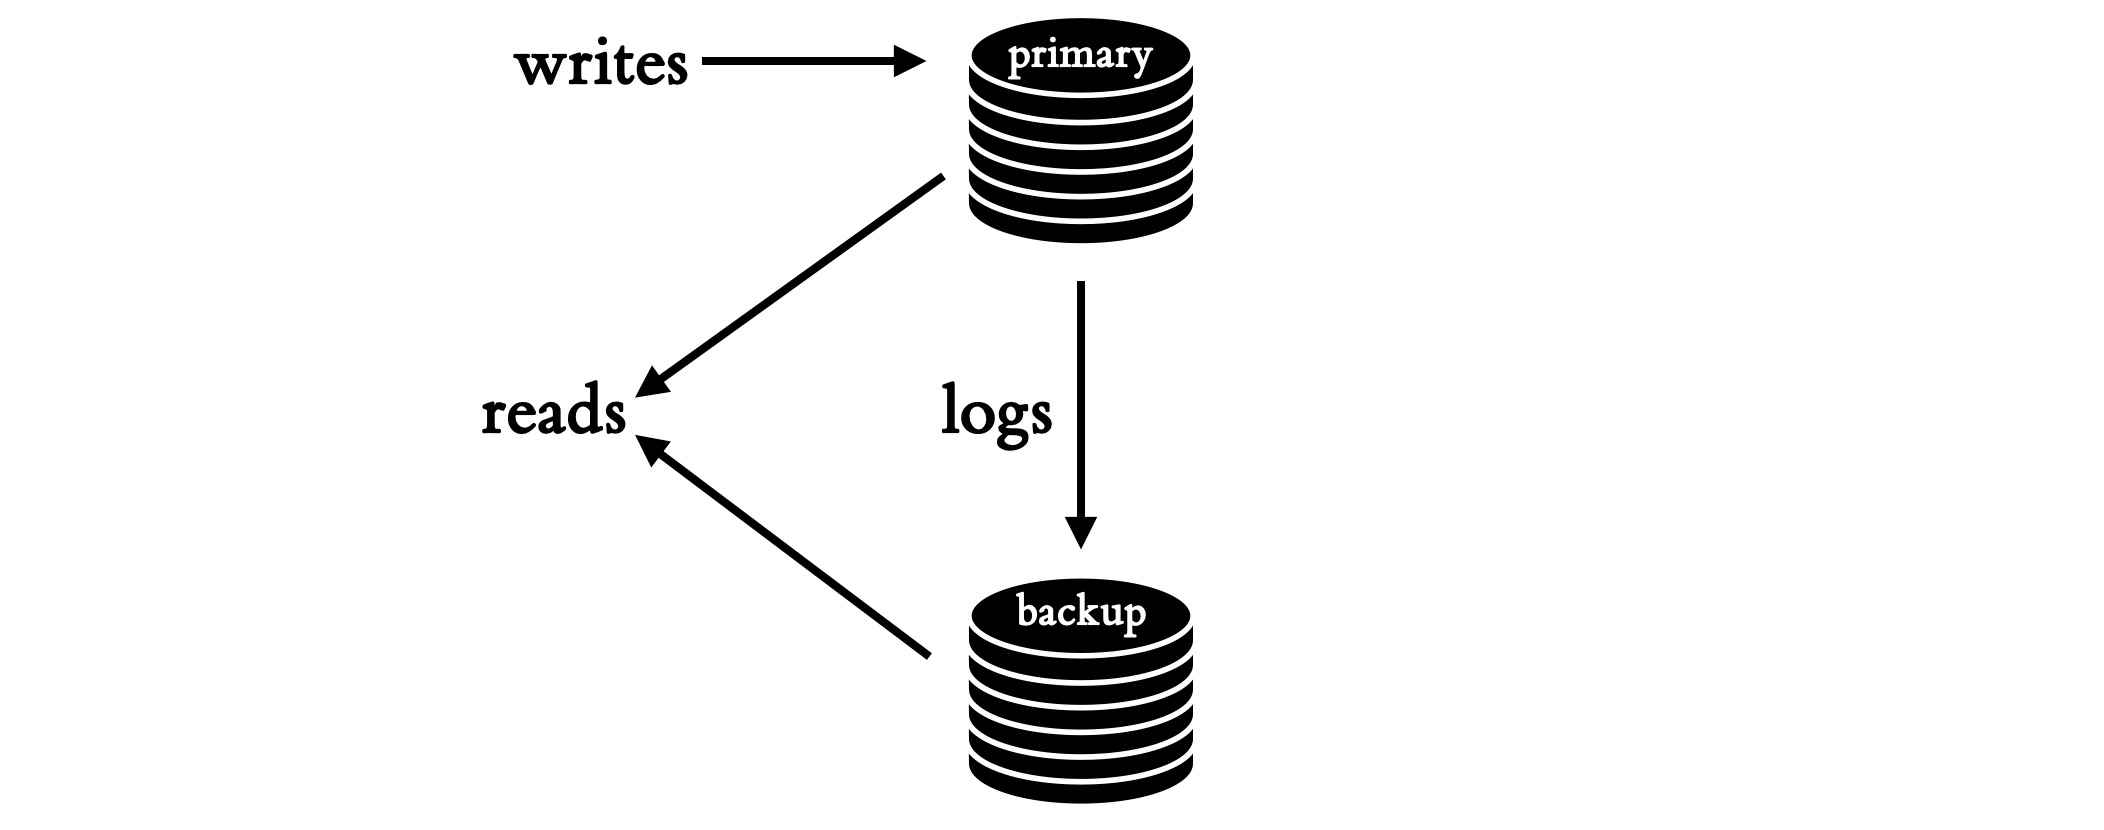 Diagrame of two databases labelled “primary” and “backup”. Writes go to the primary, logs go from primary to backup, and reads come from the primary and backup.